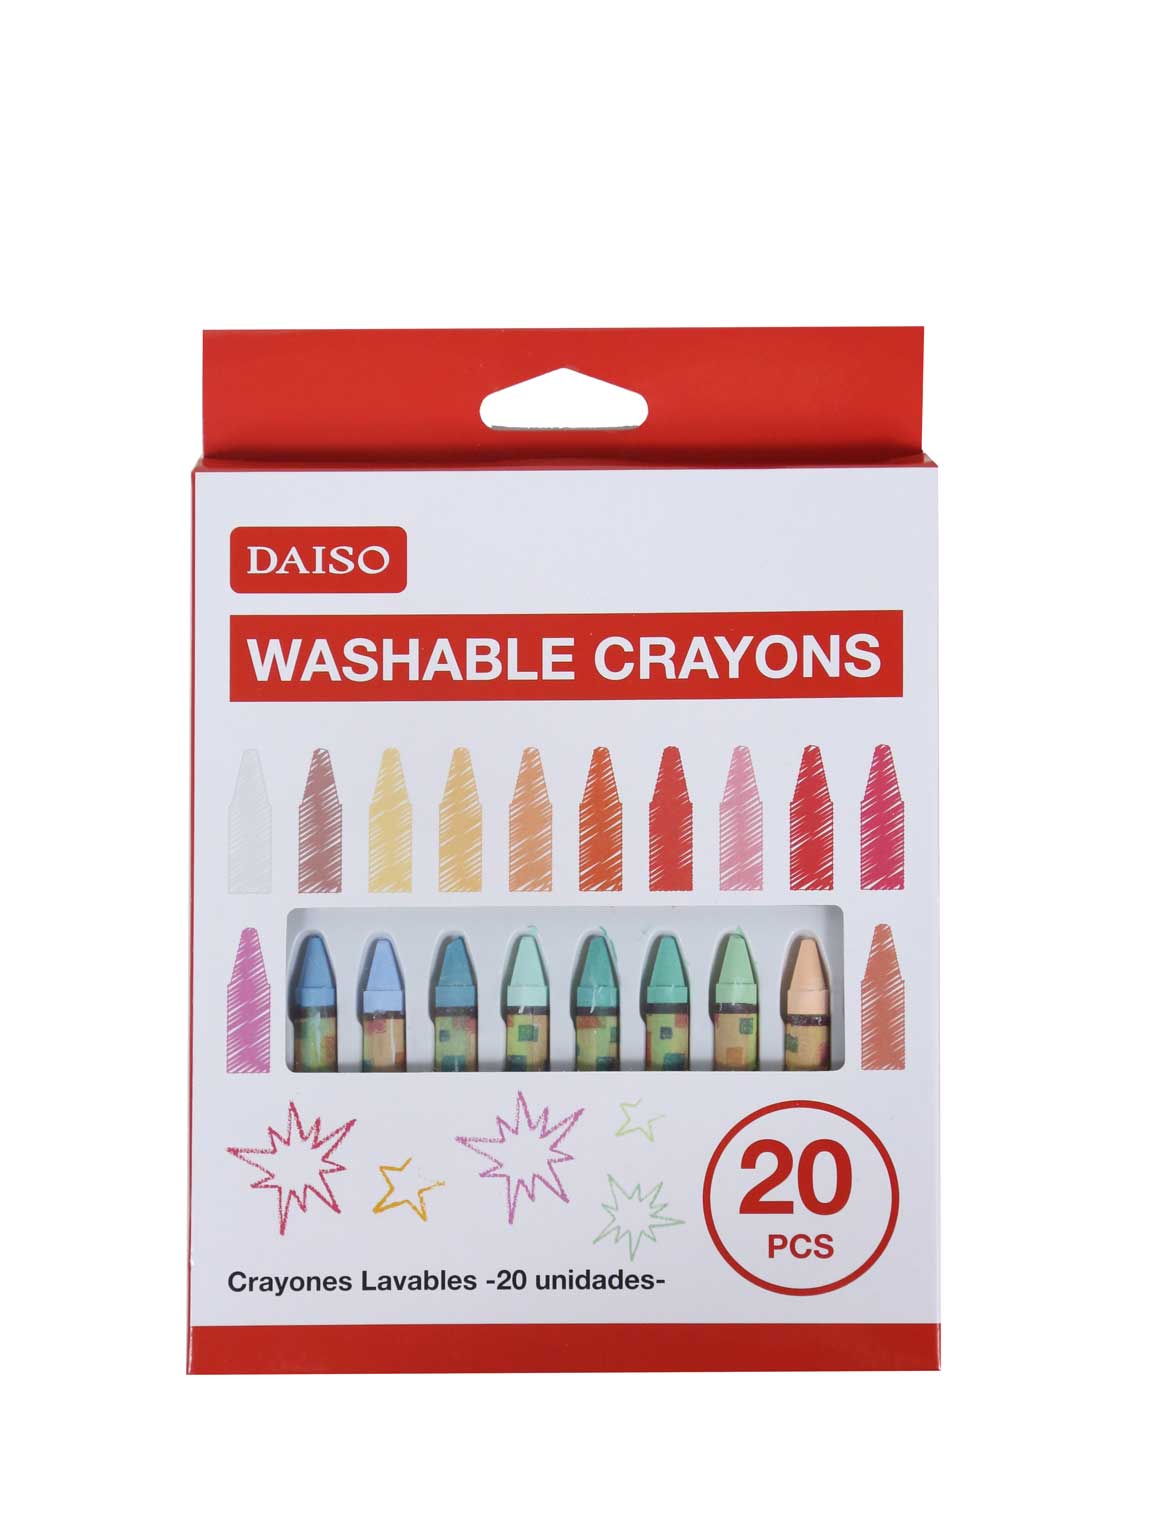 Washable Crayons - 20 Colors - Daiso Japan Middle East